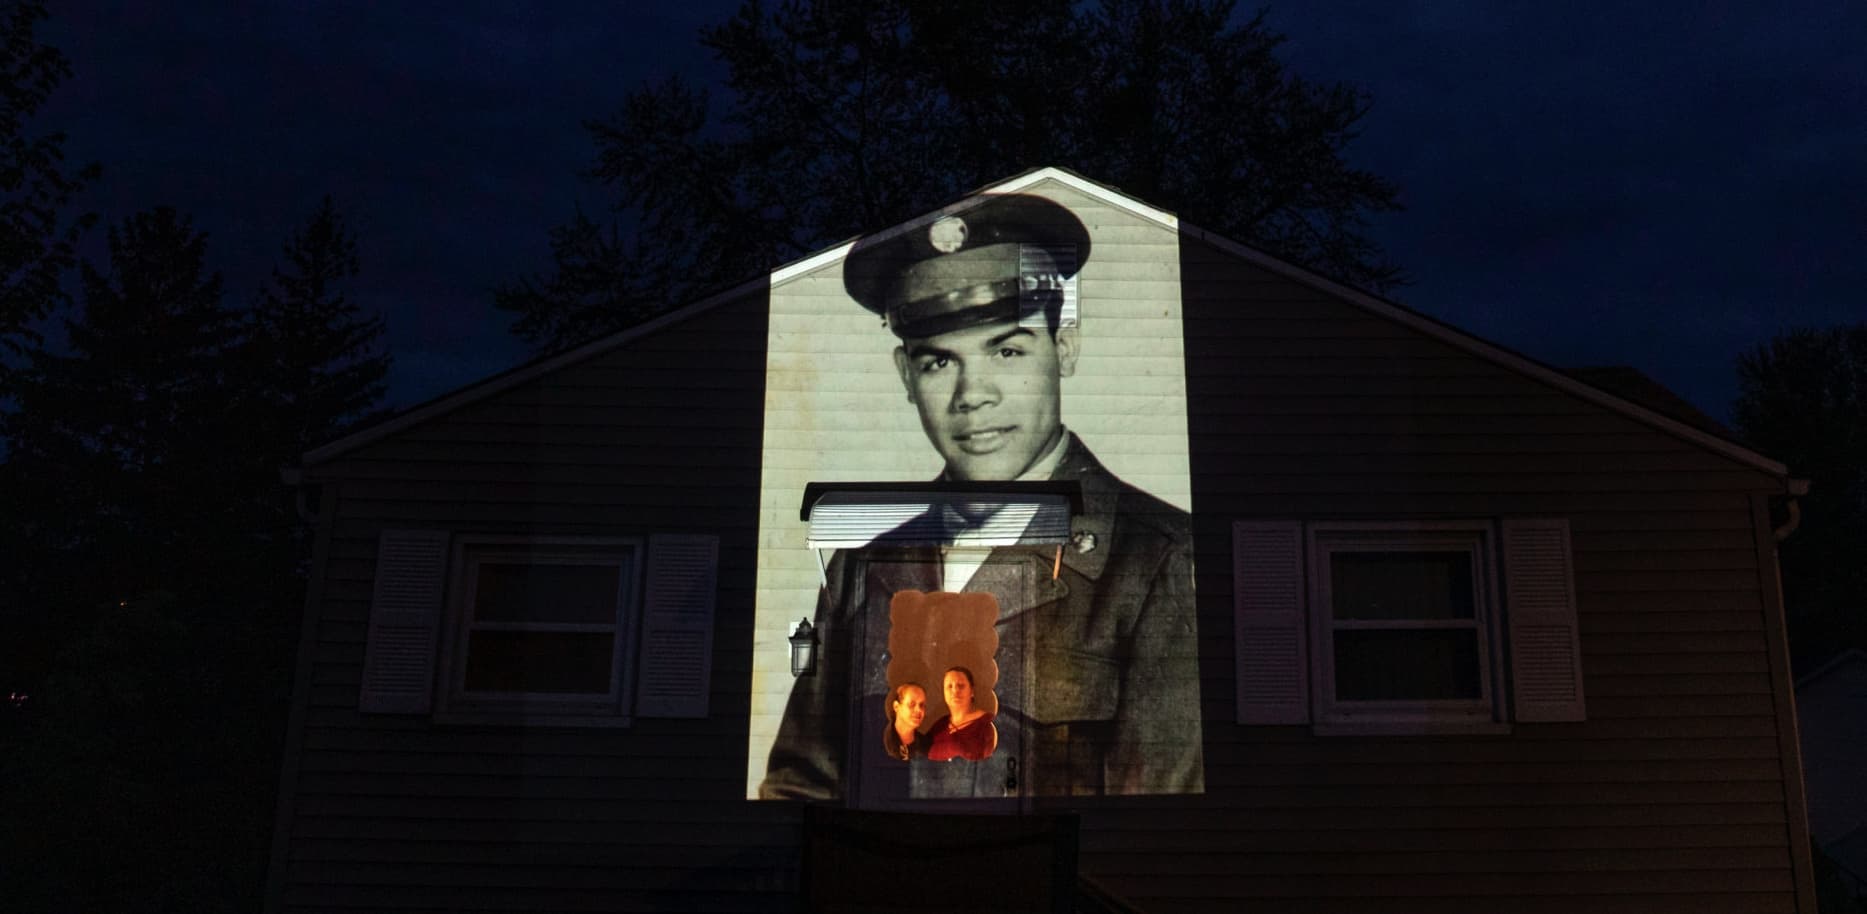 An image of veteran Samuel Melendez is projected onto the home of his nieces, Janet Ramirez, right, and Mary Perez, as they look out a doorway in Chicopee, Mass. (David Goldman/AP)